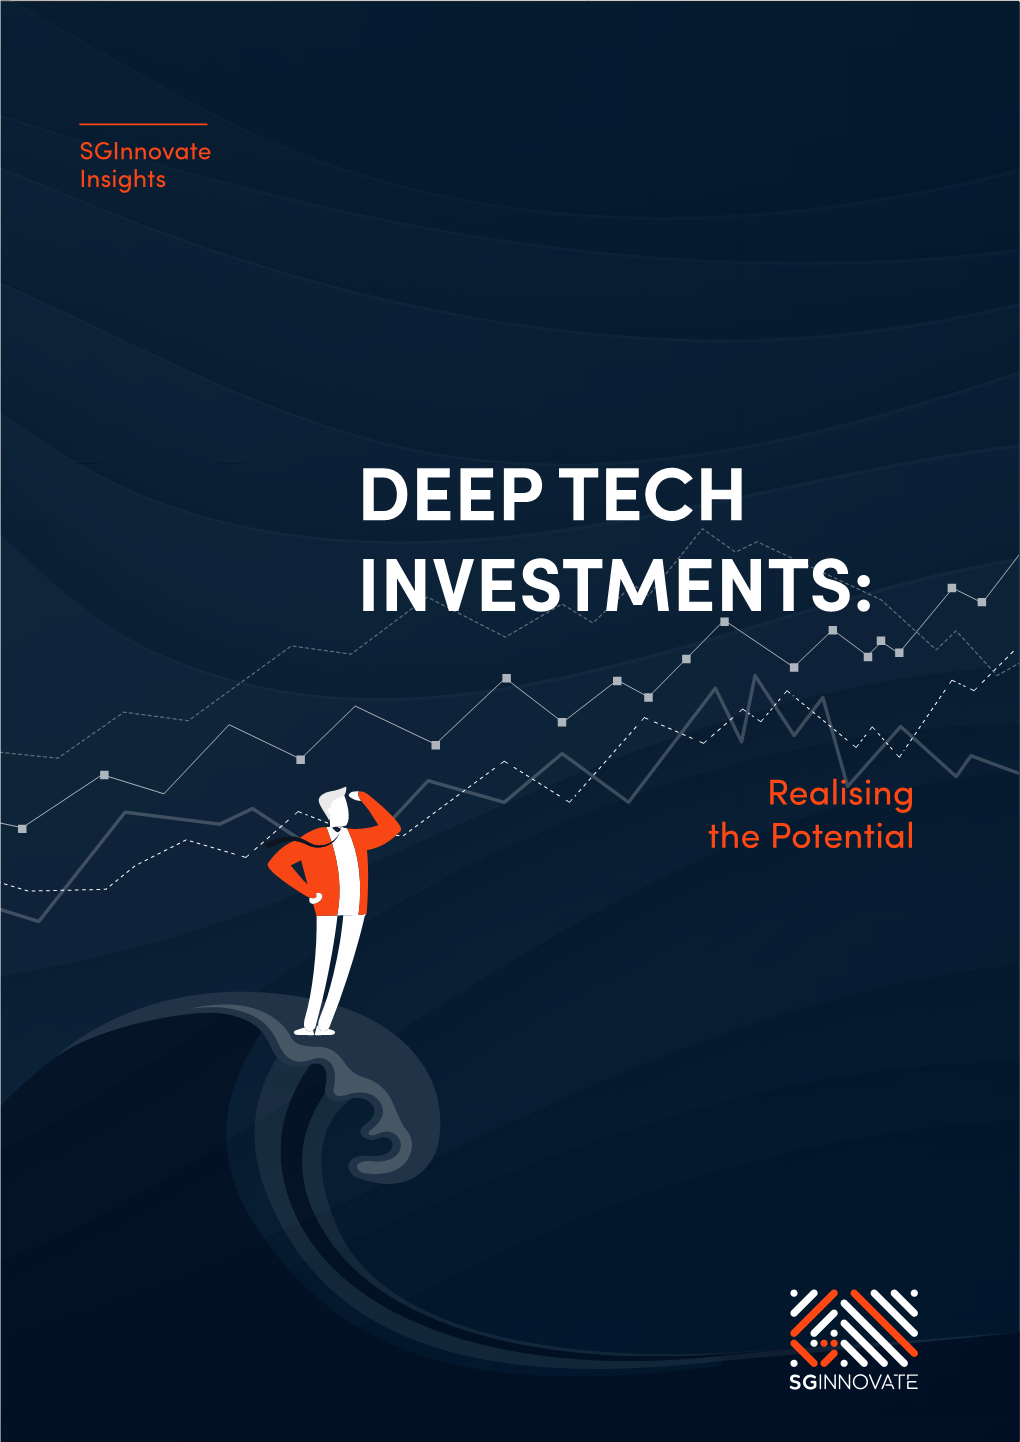 What Is Deep Tech?